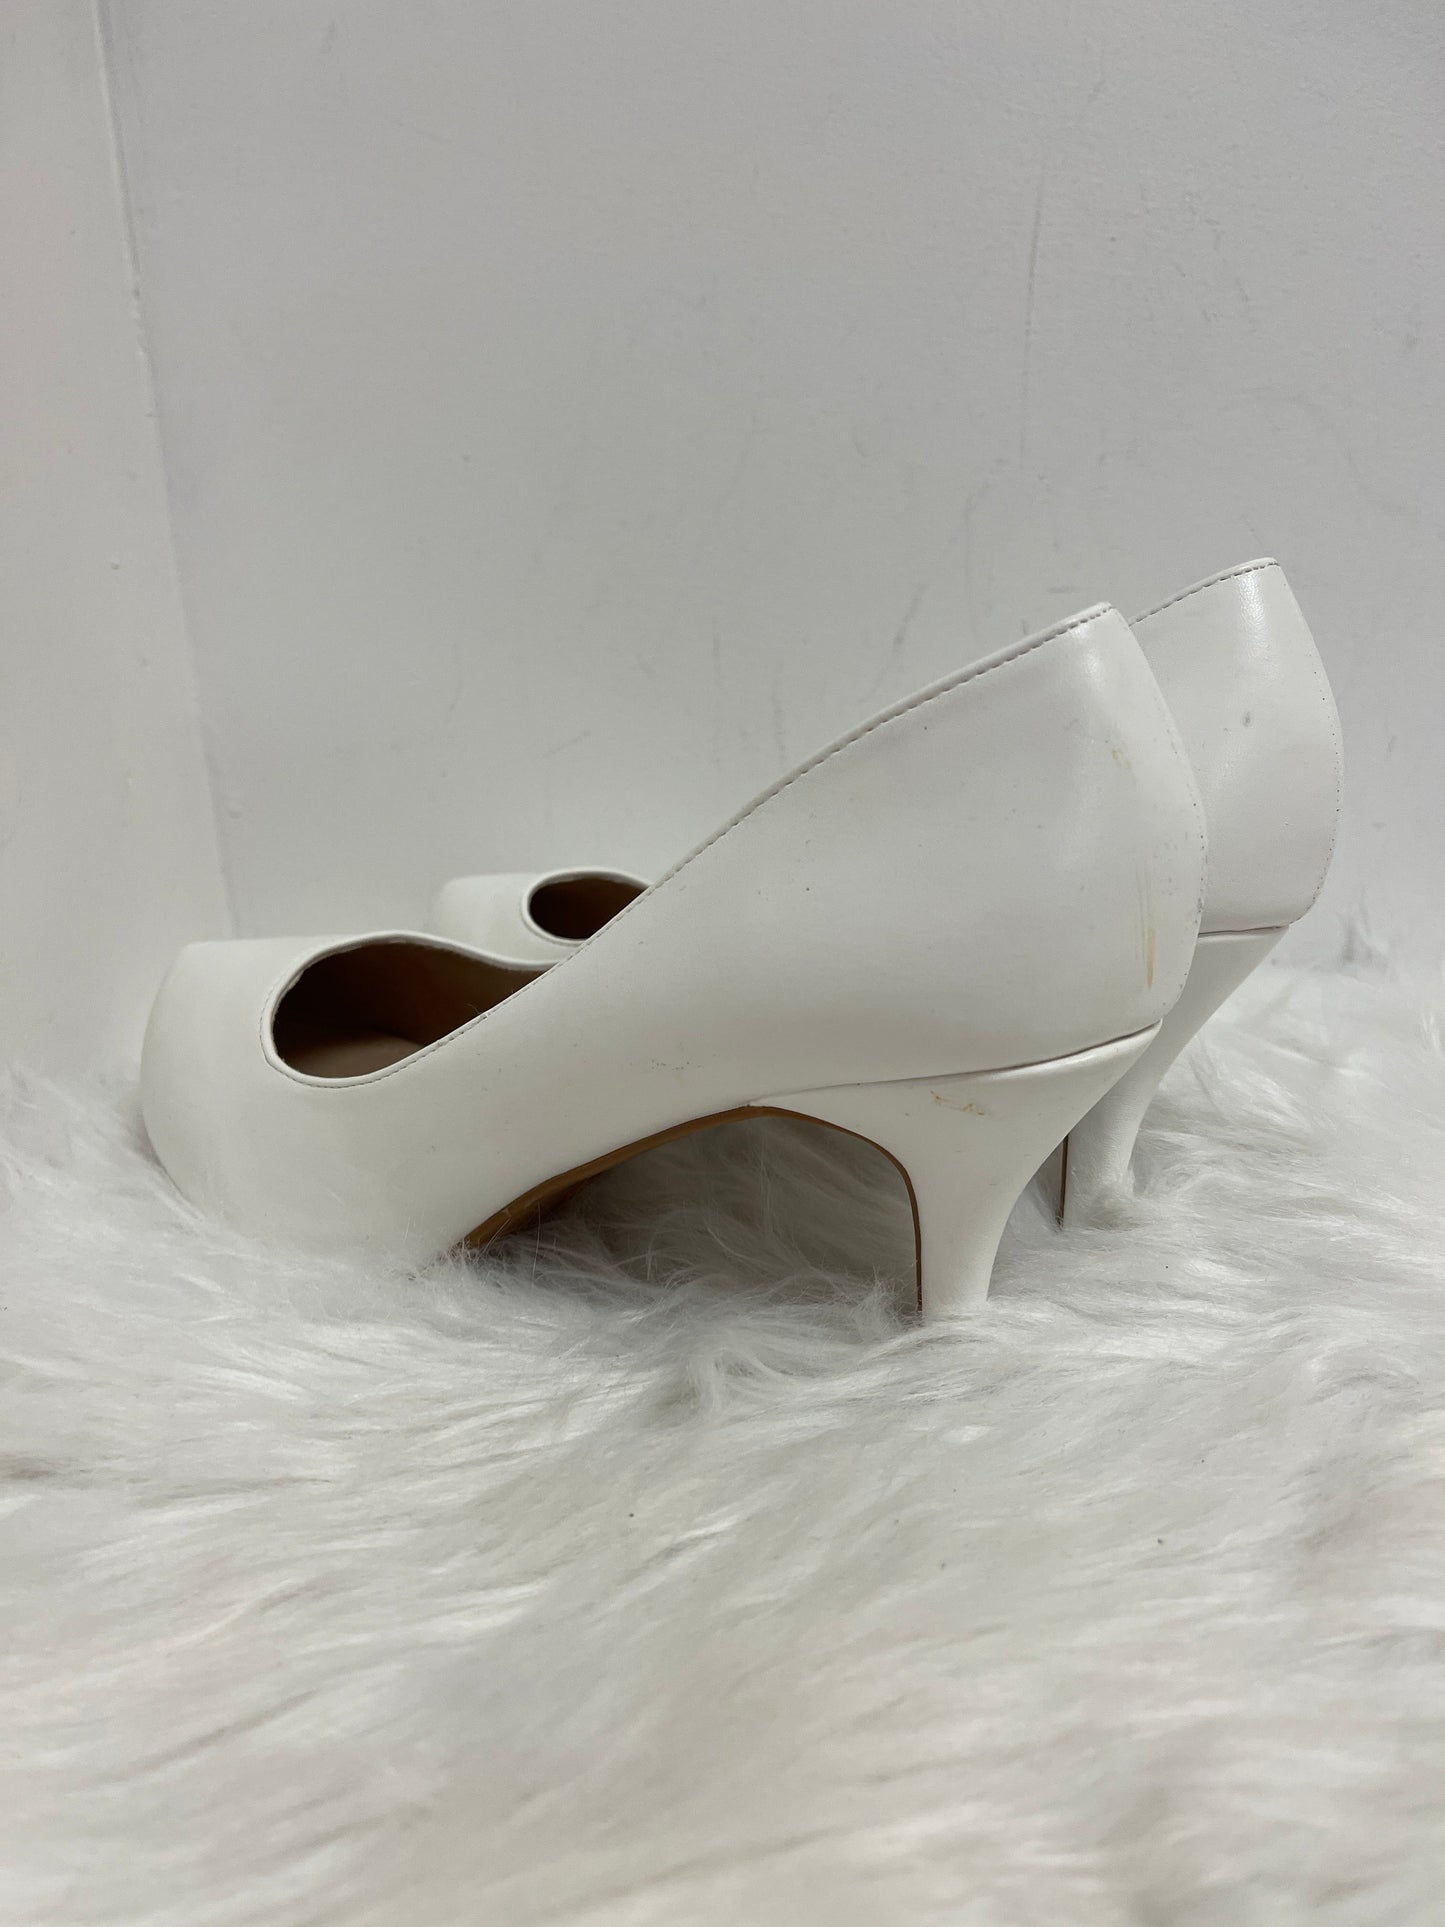 White Shoes Heels Stiletto Clothes Mentor, Size 11